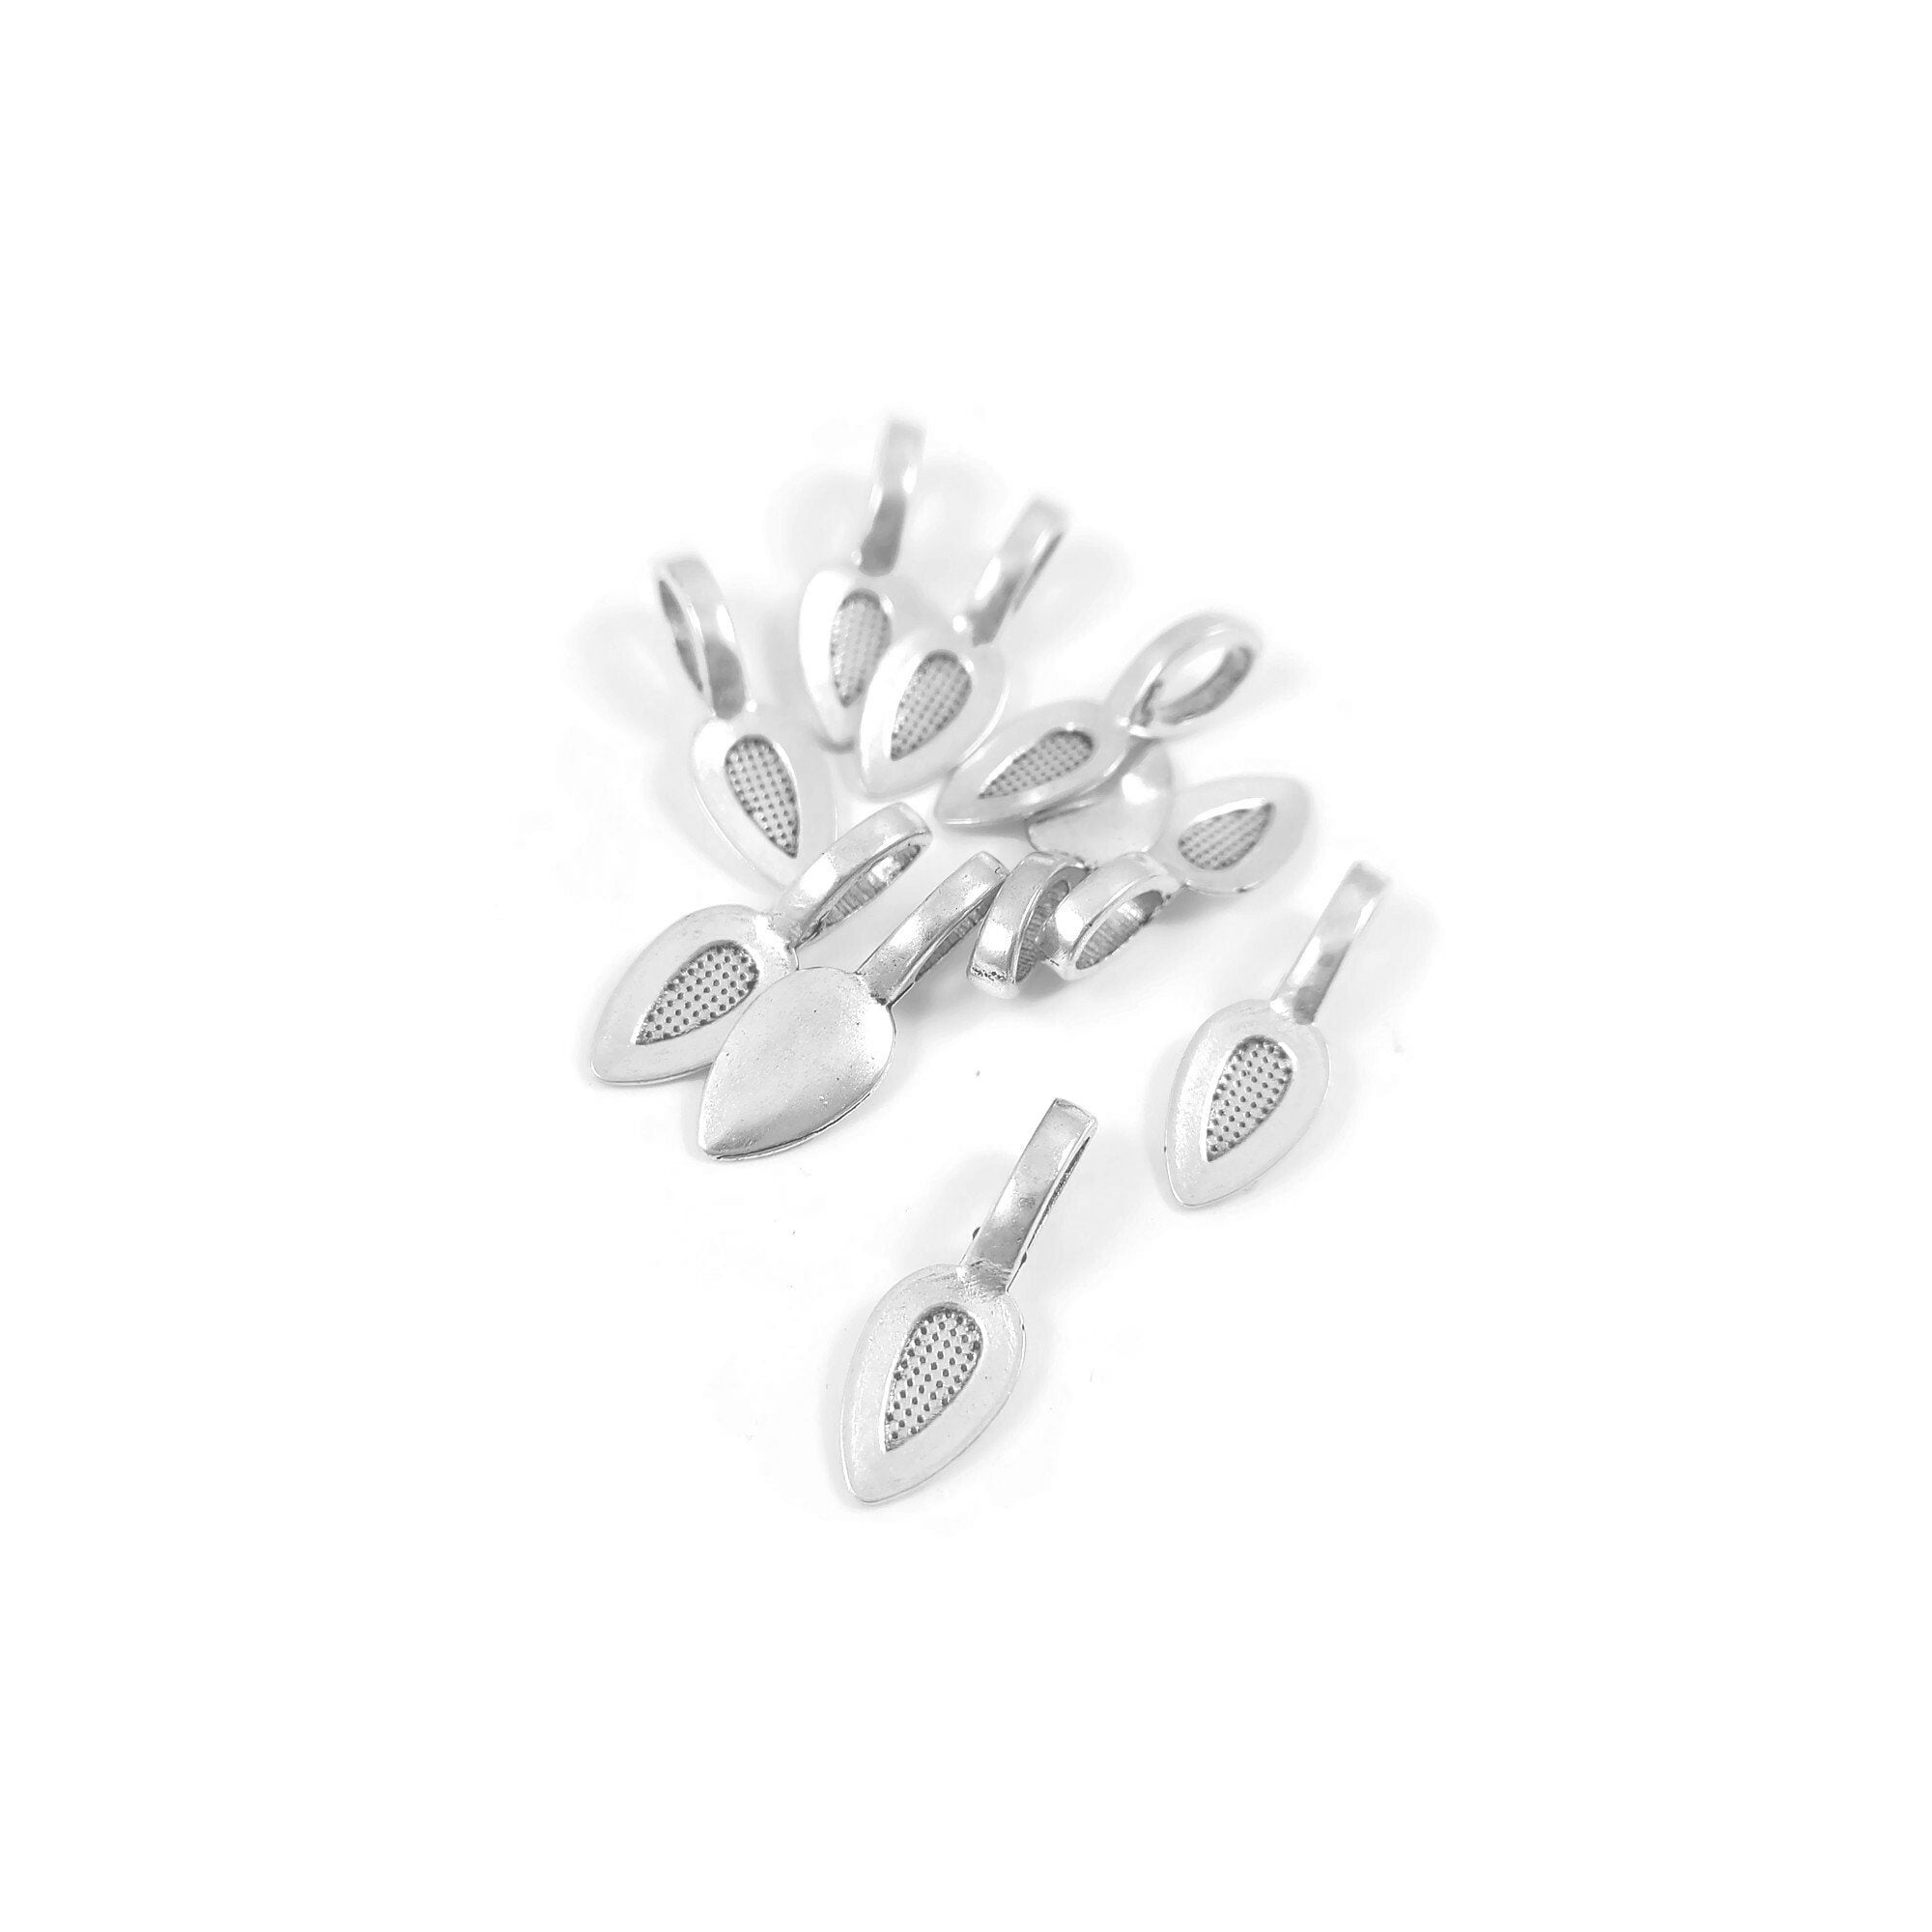 Jewelry Findings: 11mm Clear Flat Pad Earring Back x 14- Craft